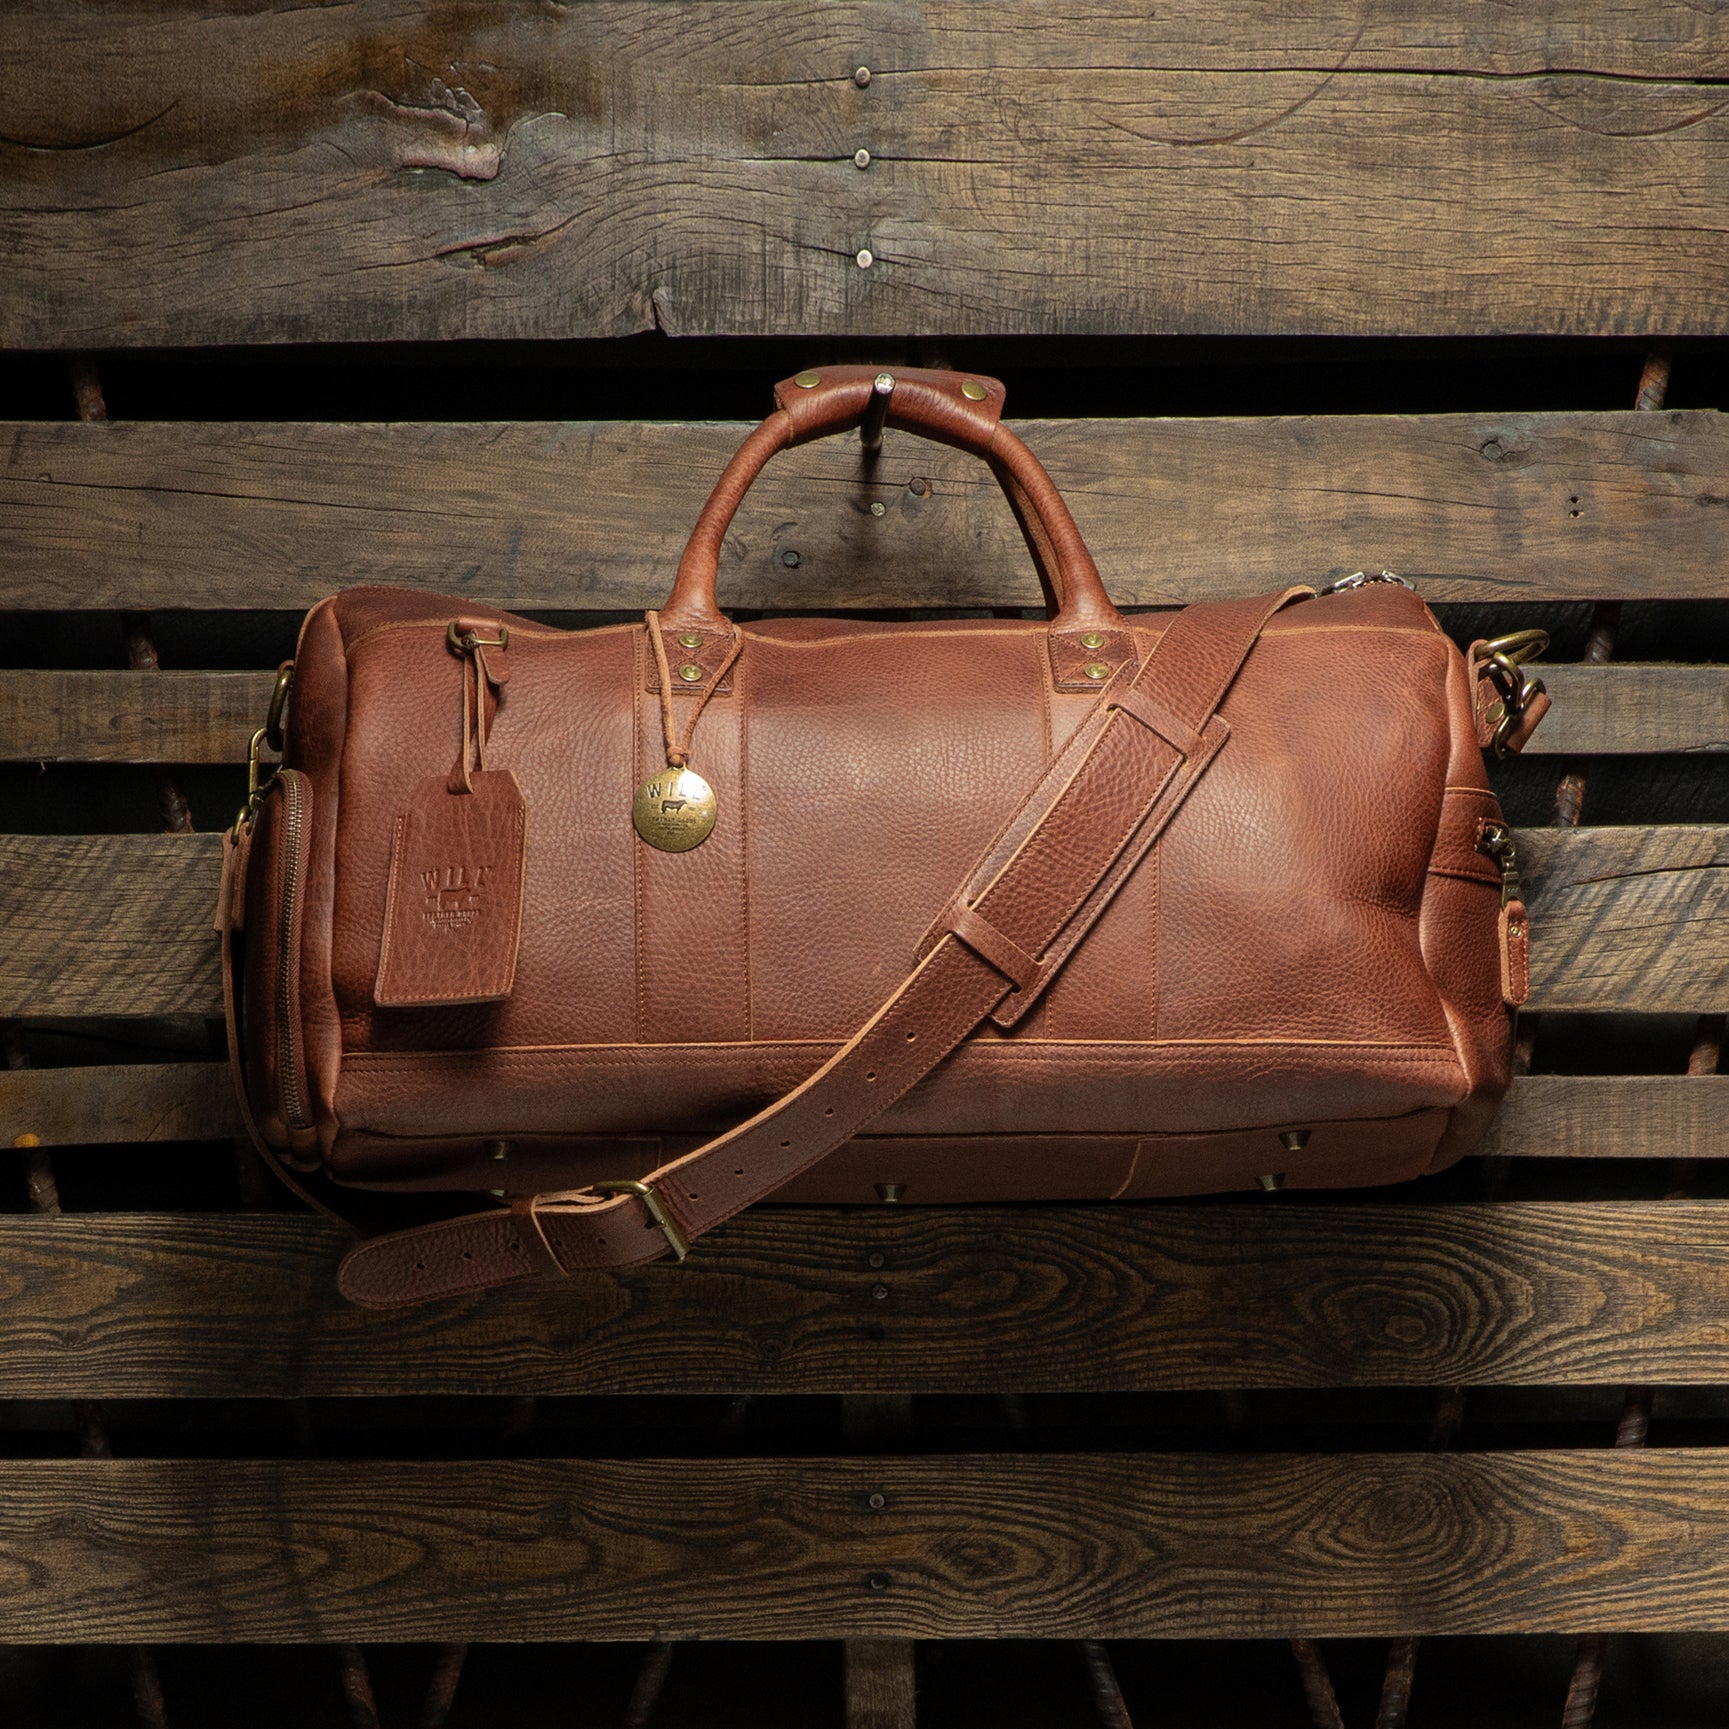 LEATHER ATTICUS SHOE DUFFLE COGNAC – Will Leather Goods